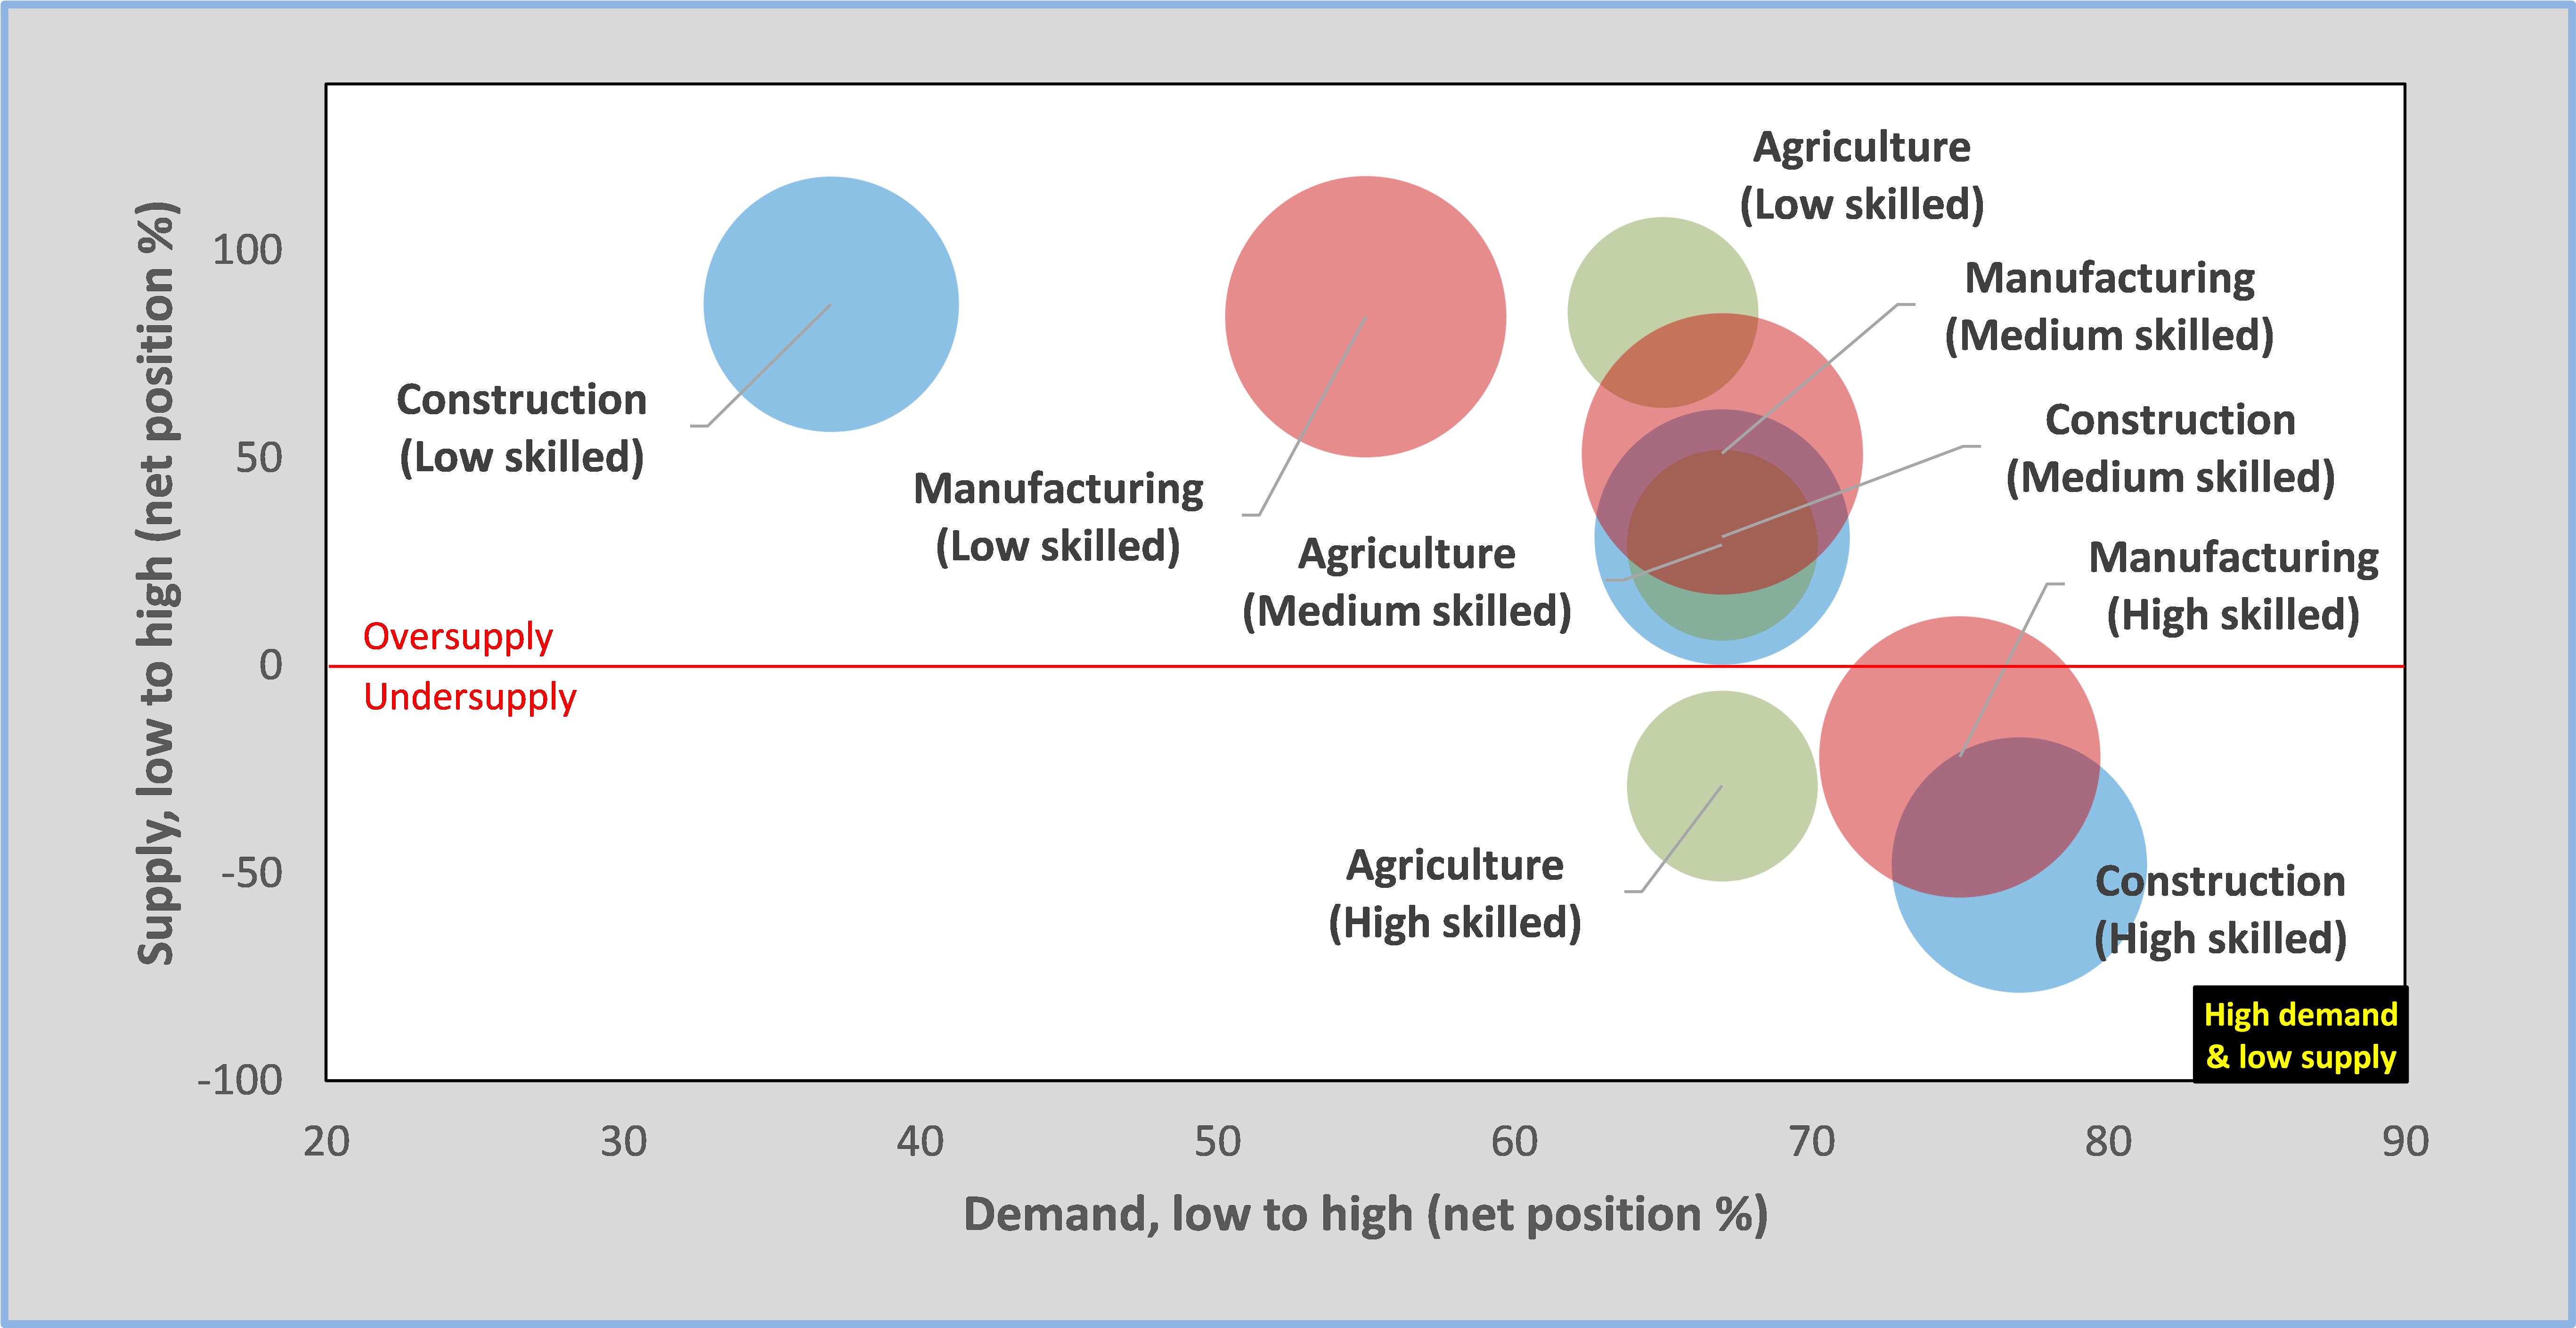 labour force demand and supply by skill level in Ethiopia